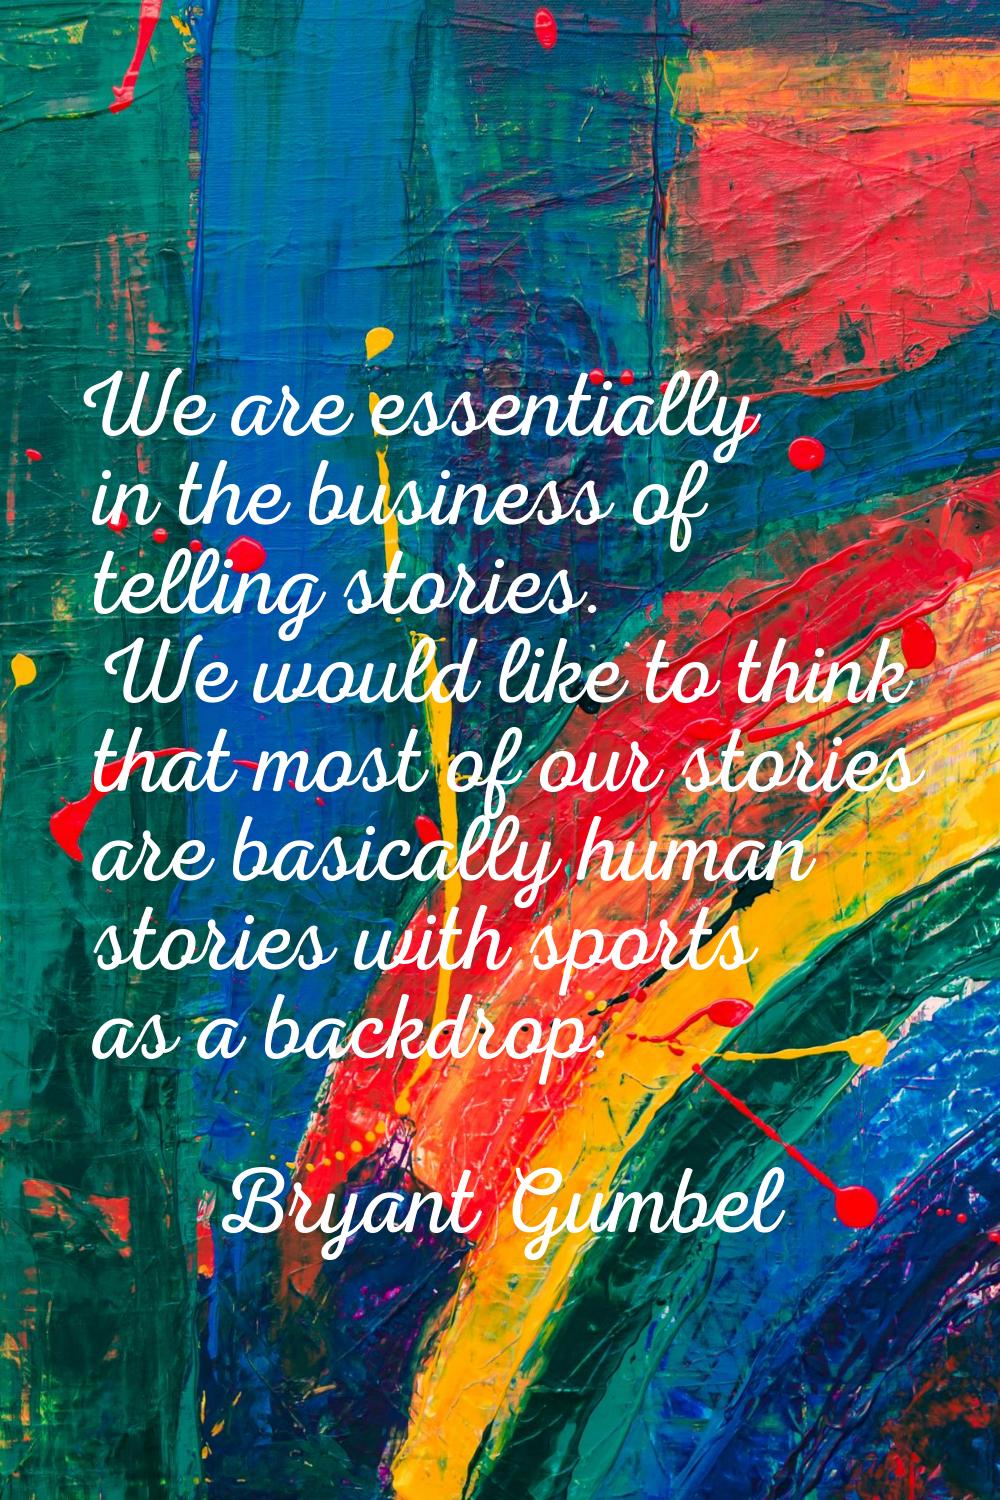 We are essentially in the business of telling stories. We would like to think that most of our stor